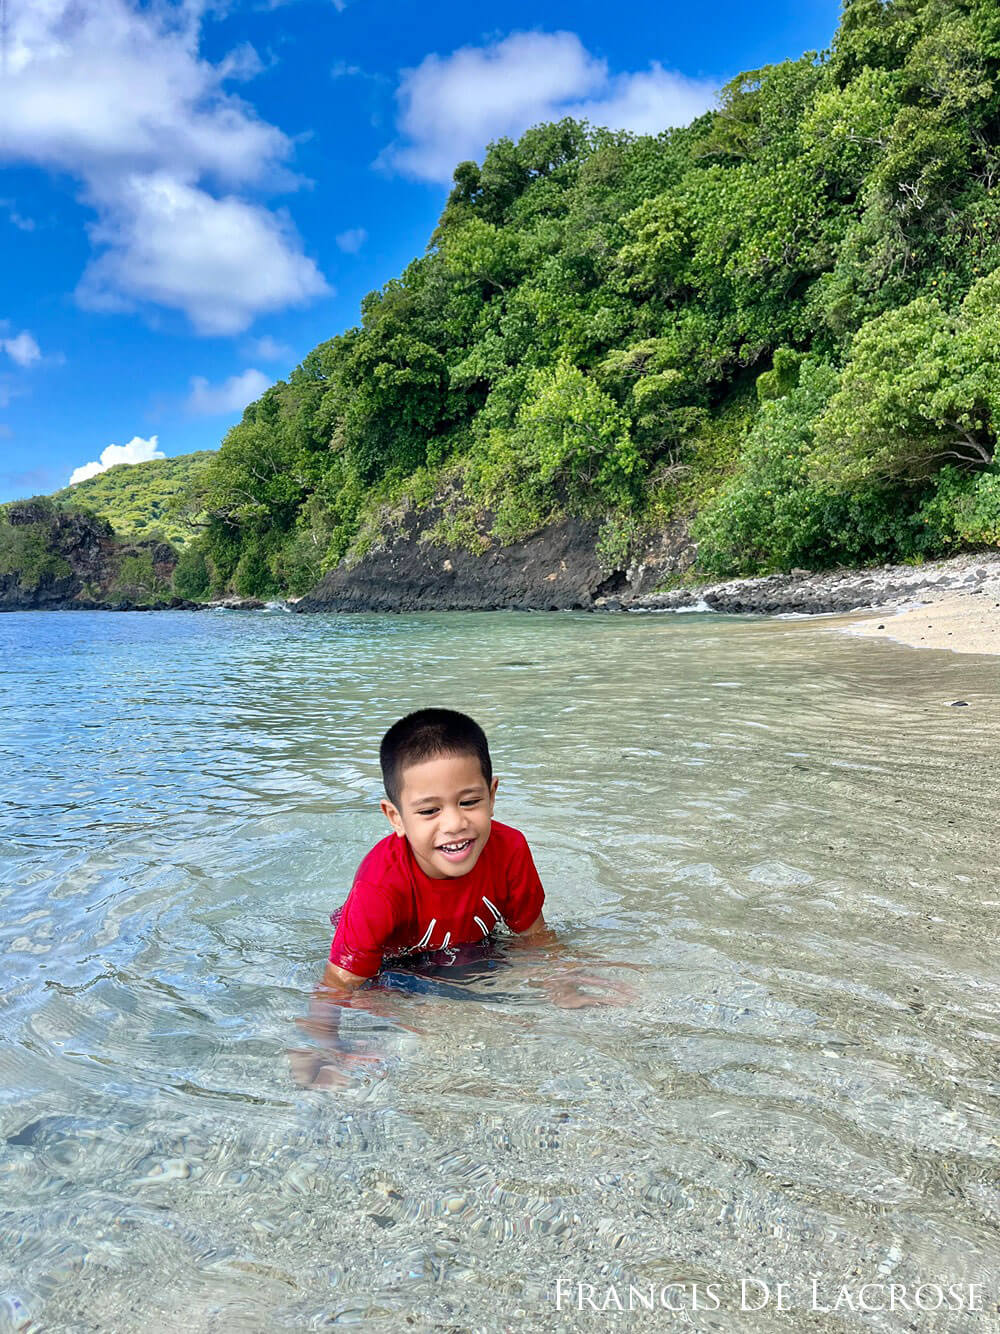 Child in the shallow, clear waters with green trees on a mountain in the background.